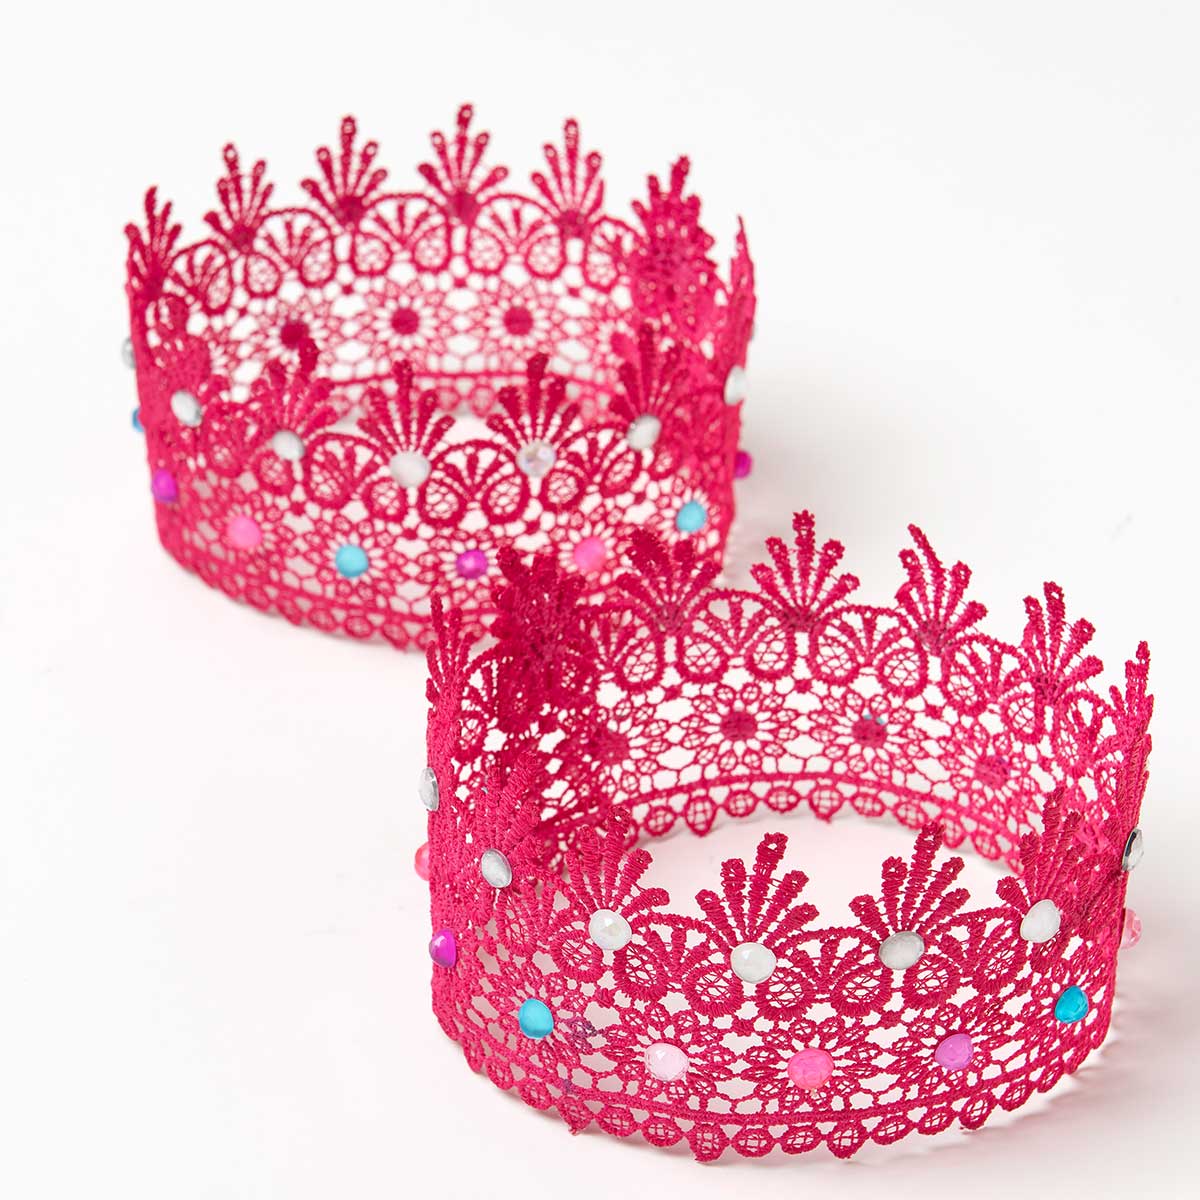 Jeweled Lace Crowns